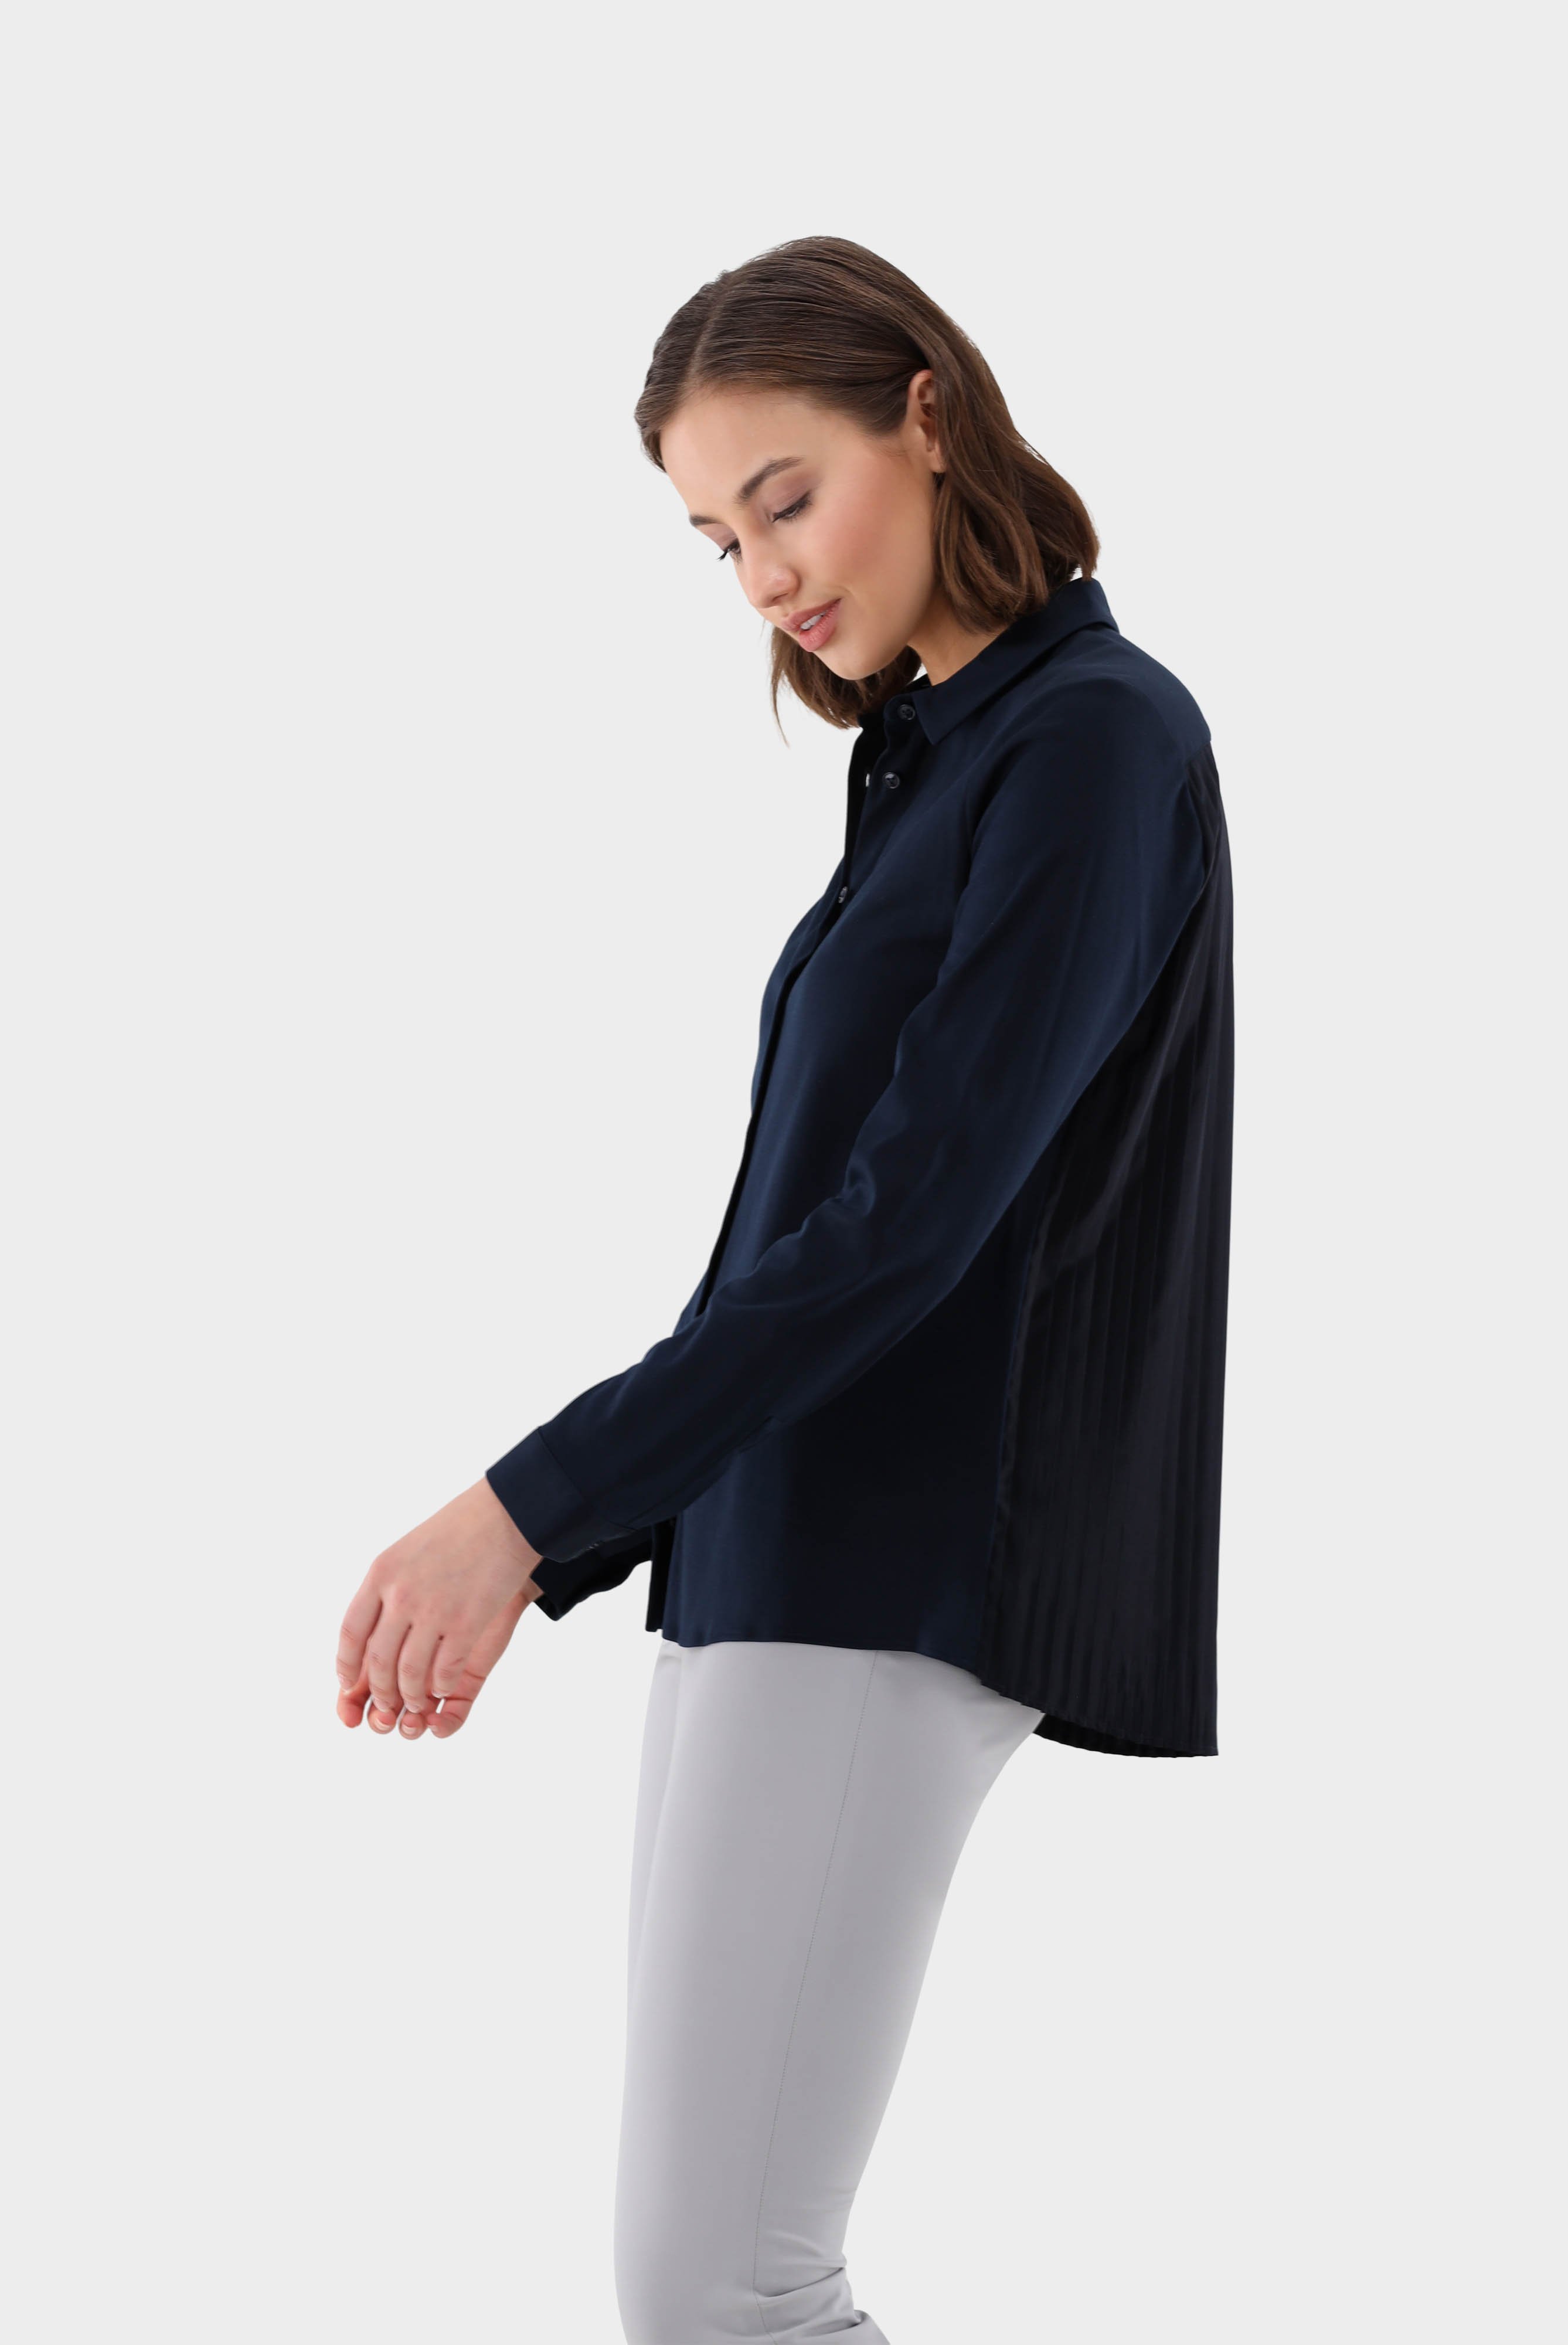 Jersey Blouses+Swiss Cotton Blouse with Pleated Back+05.6703.18.180031.790.32